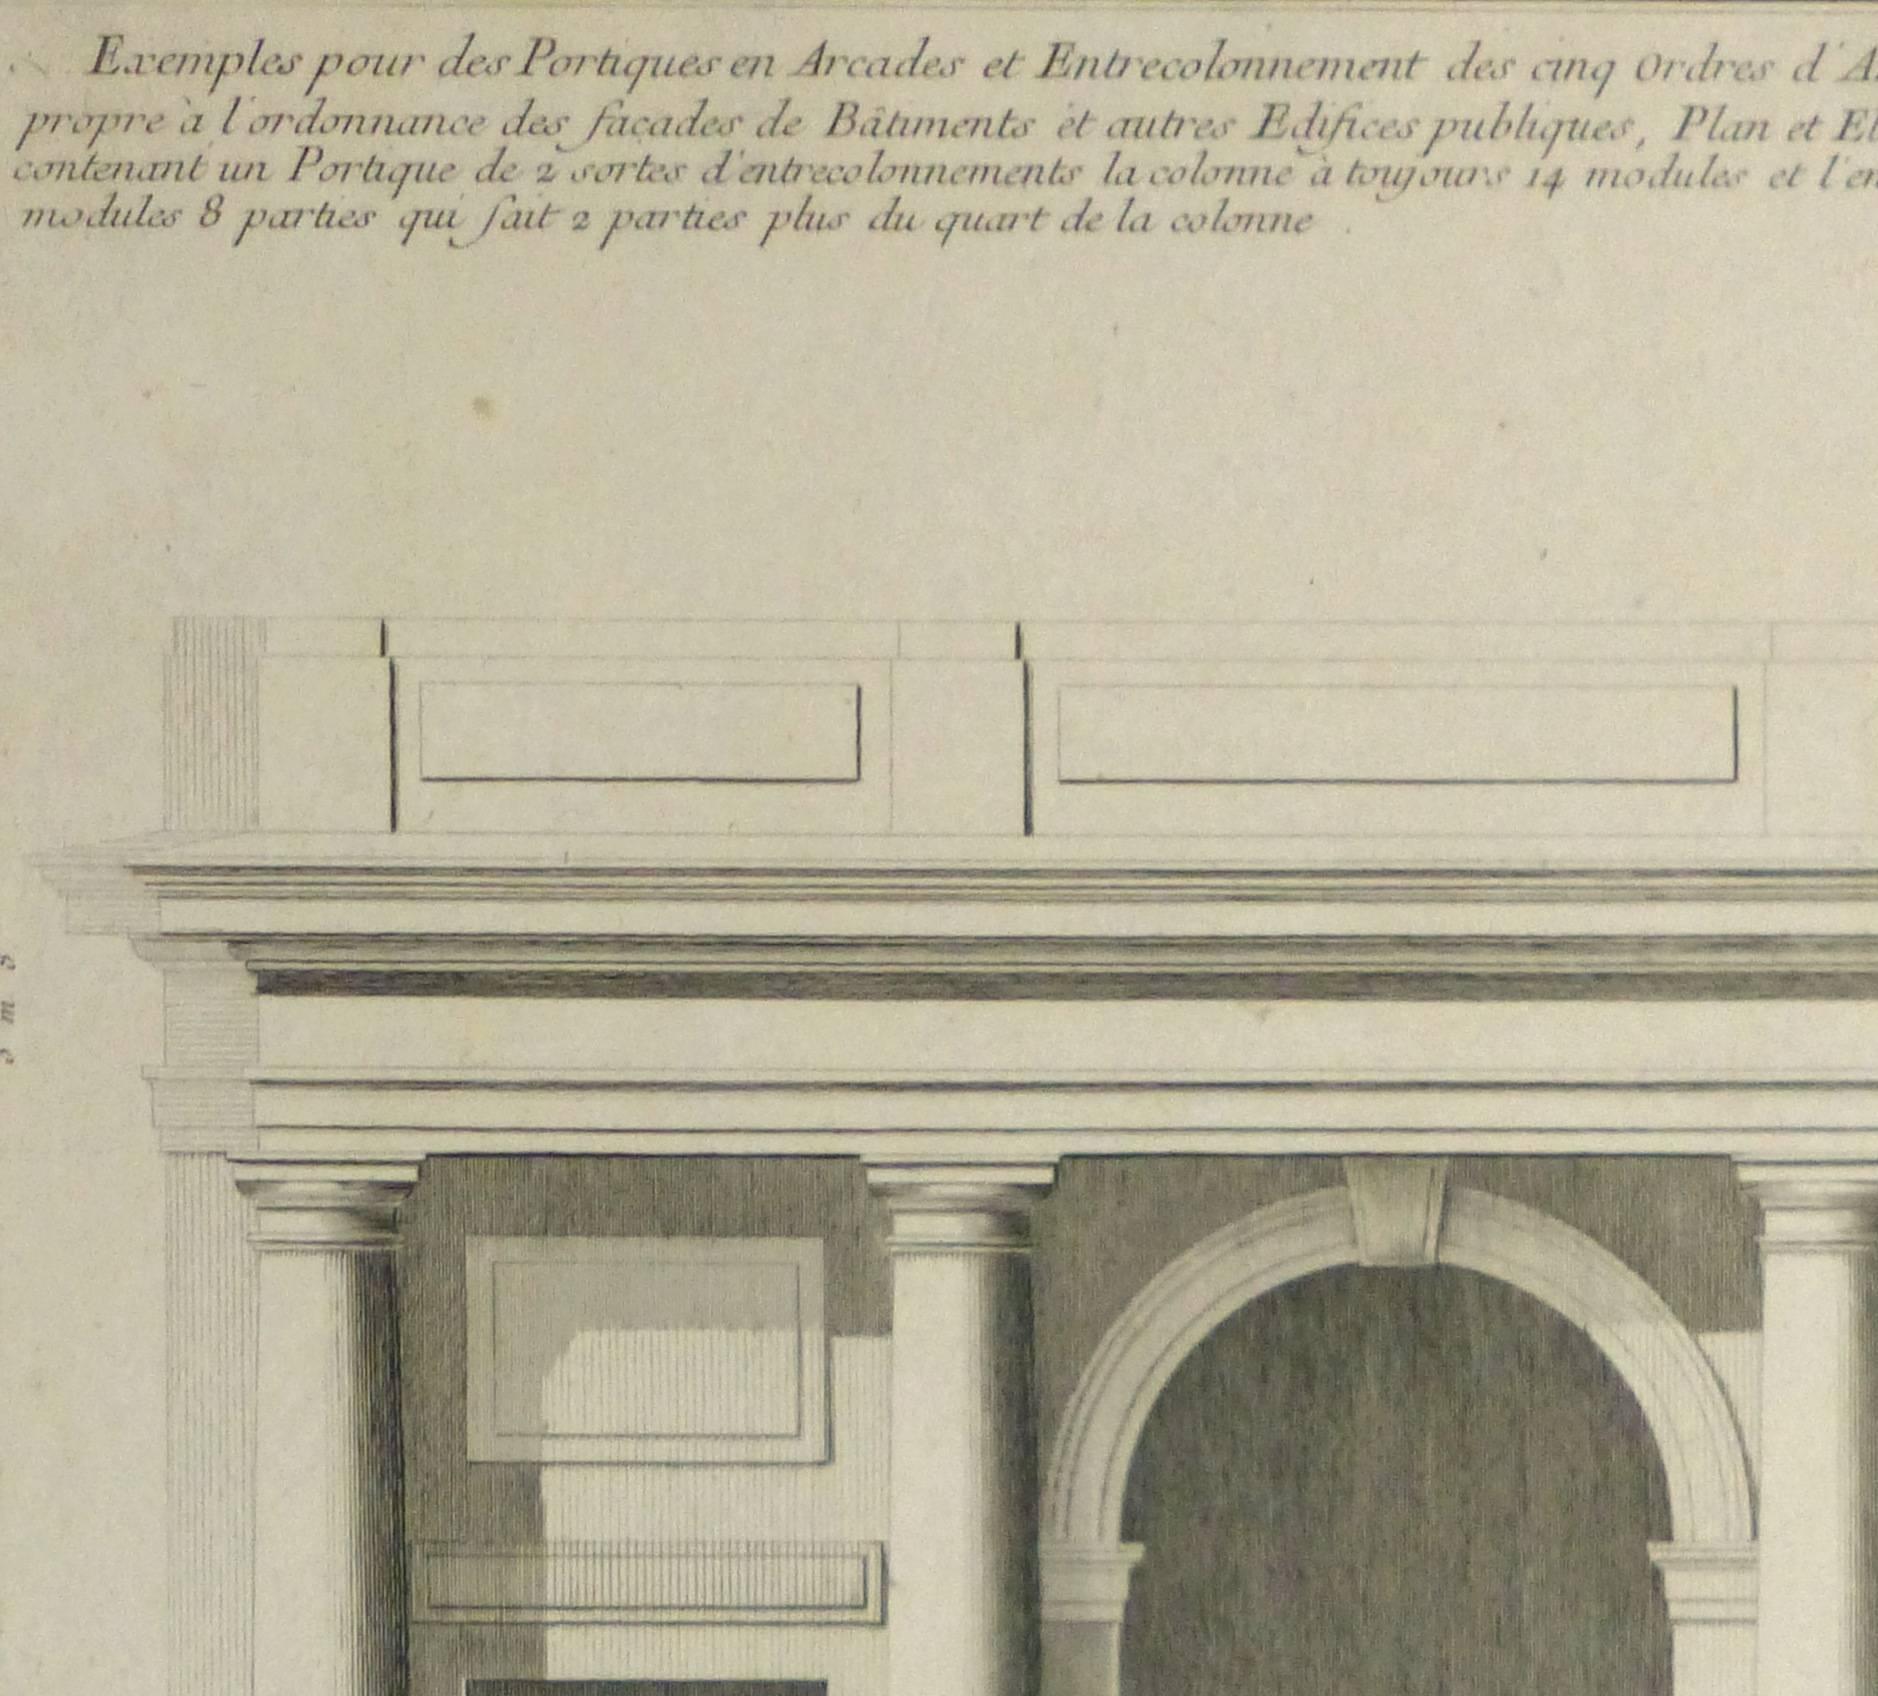 Antique French Copper Engraving - Portico Architectural Details - Print by Unknown